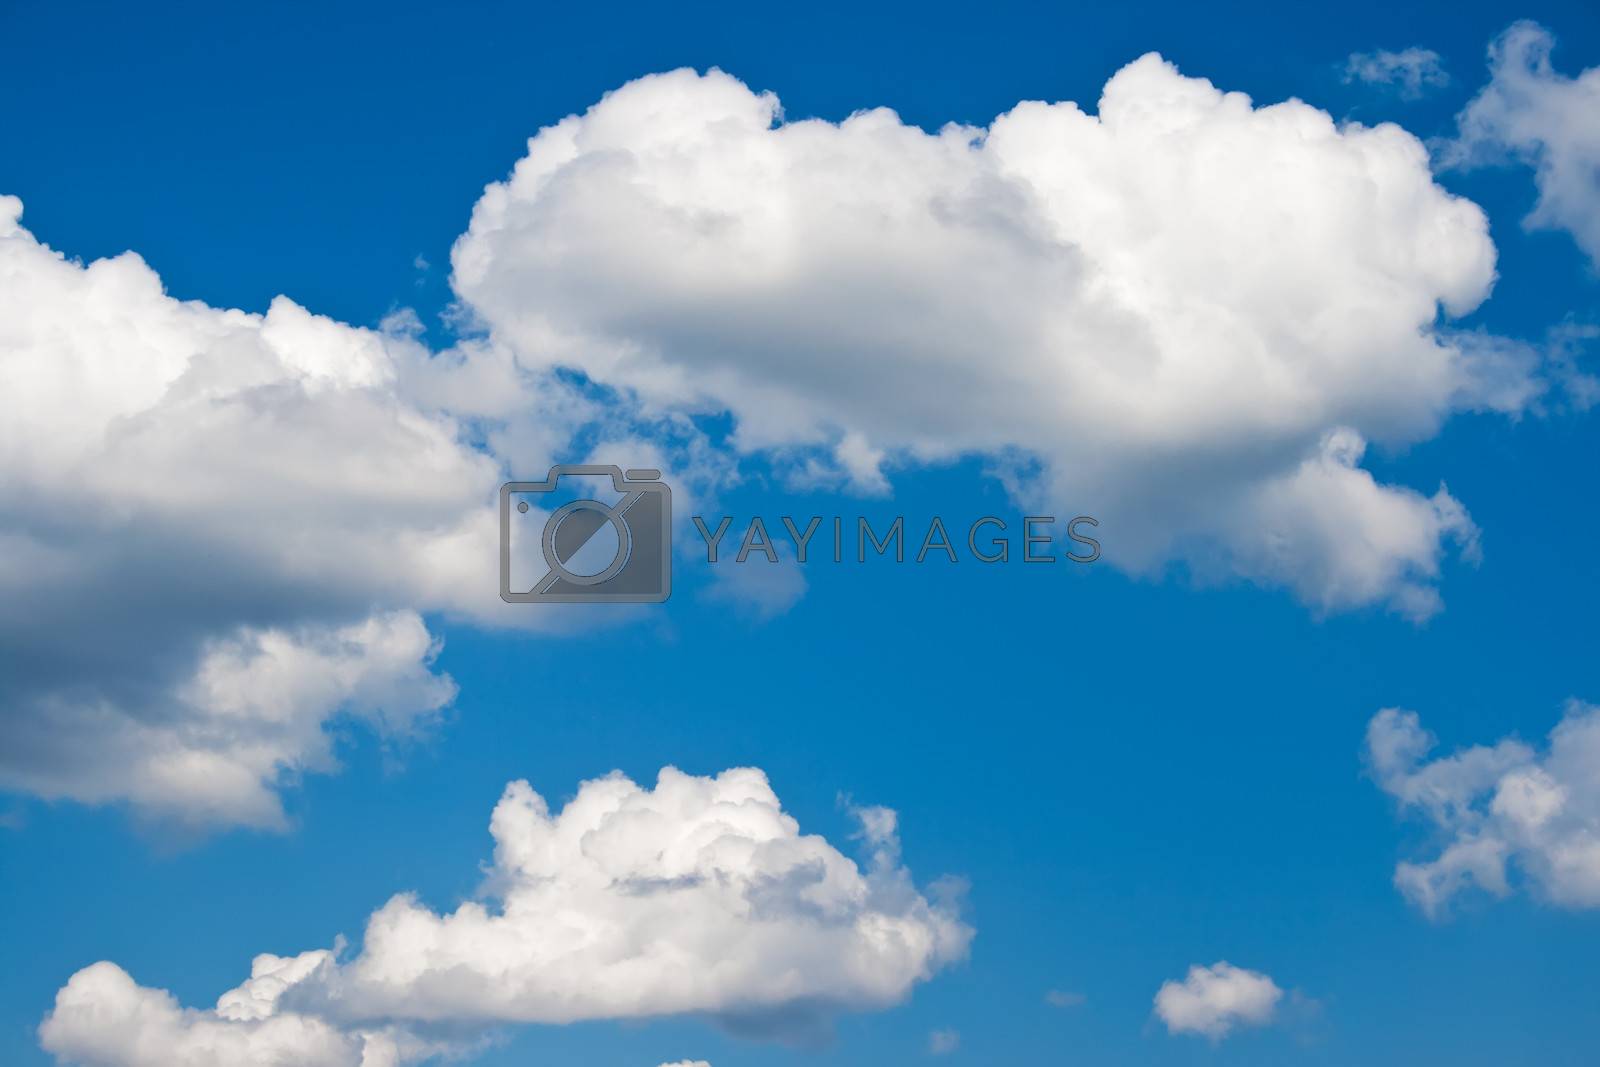 Royalty free image of Blue sky by sailorr